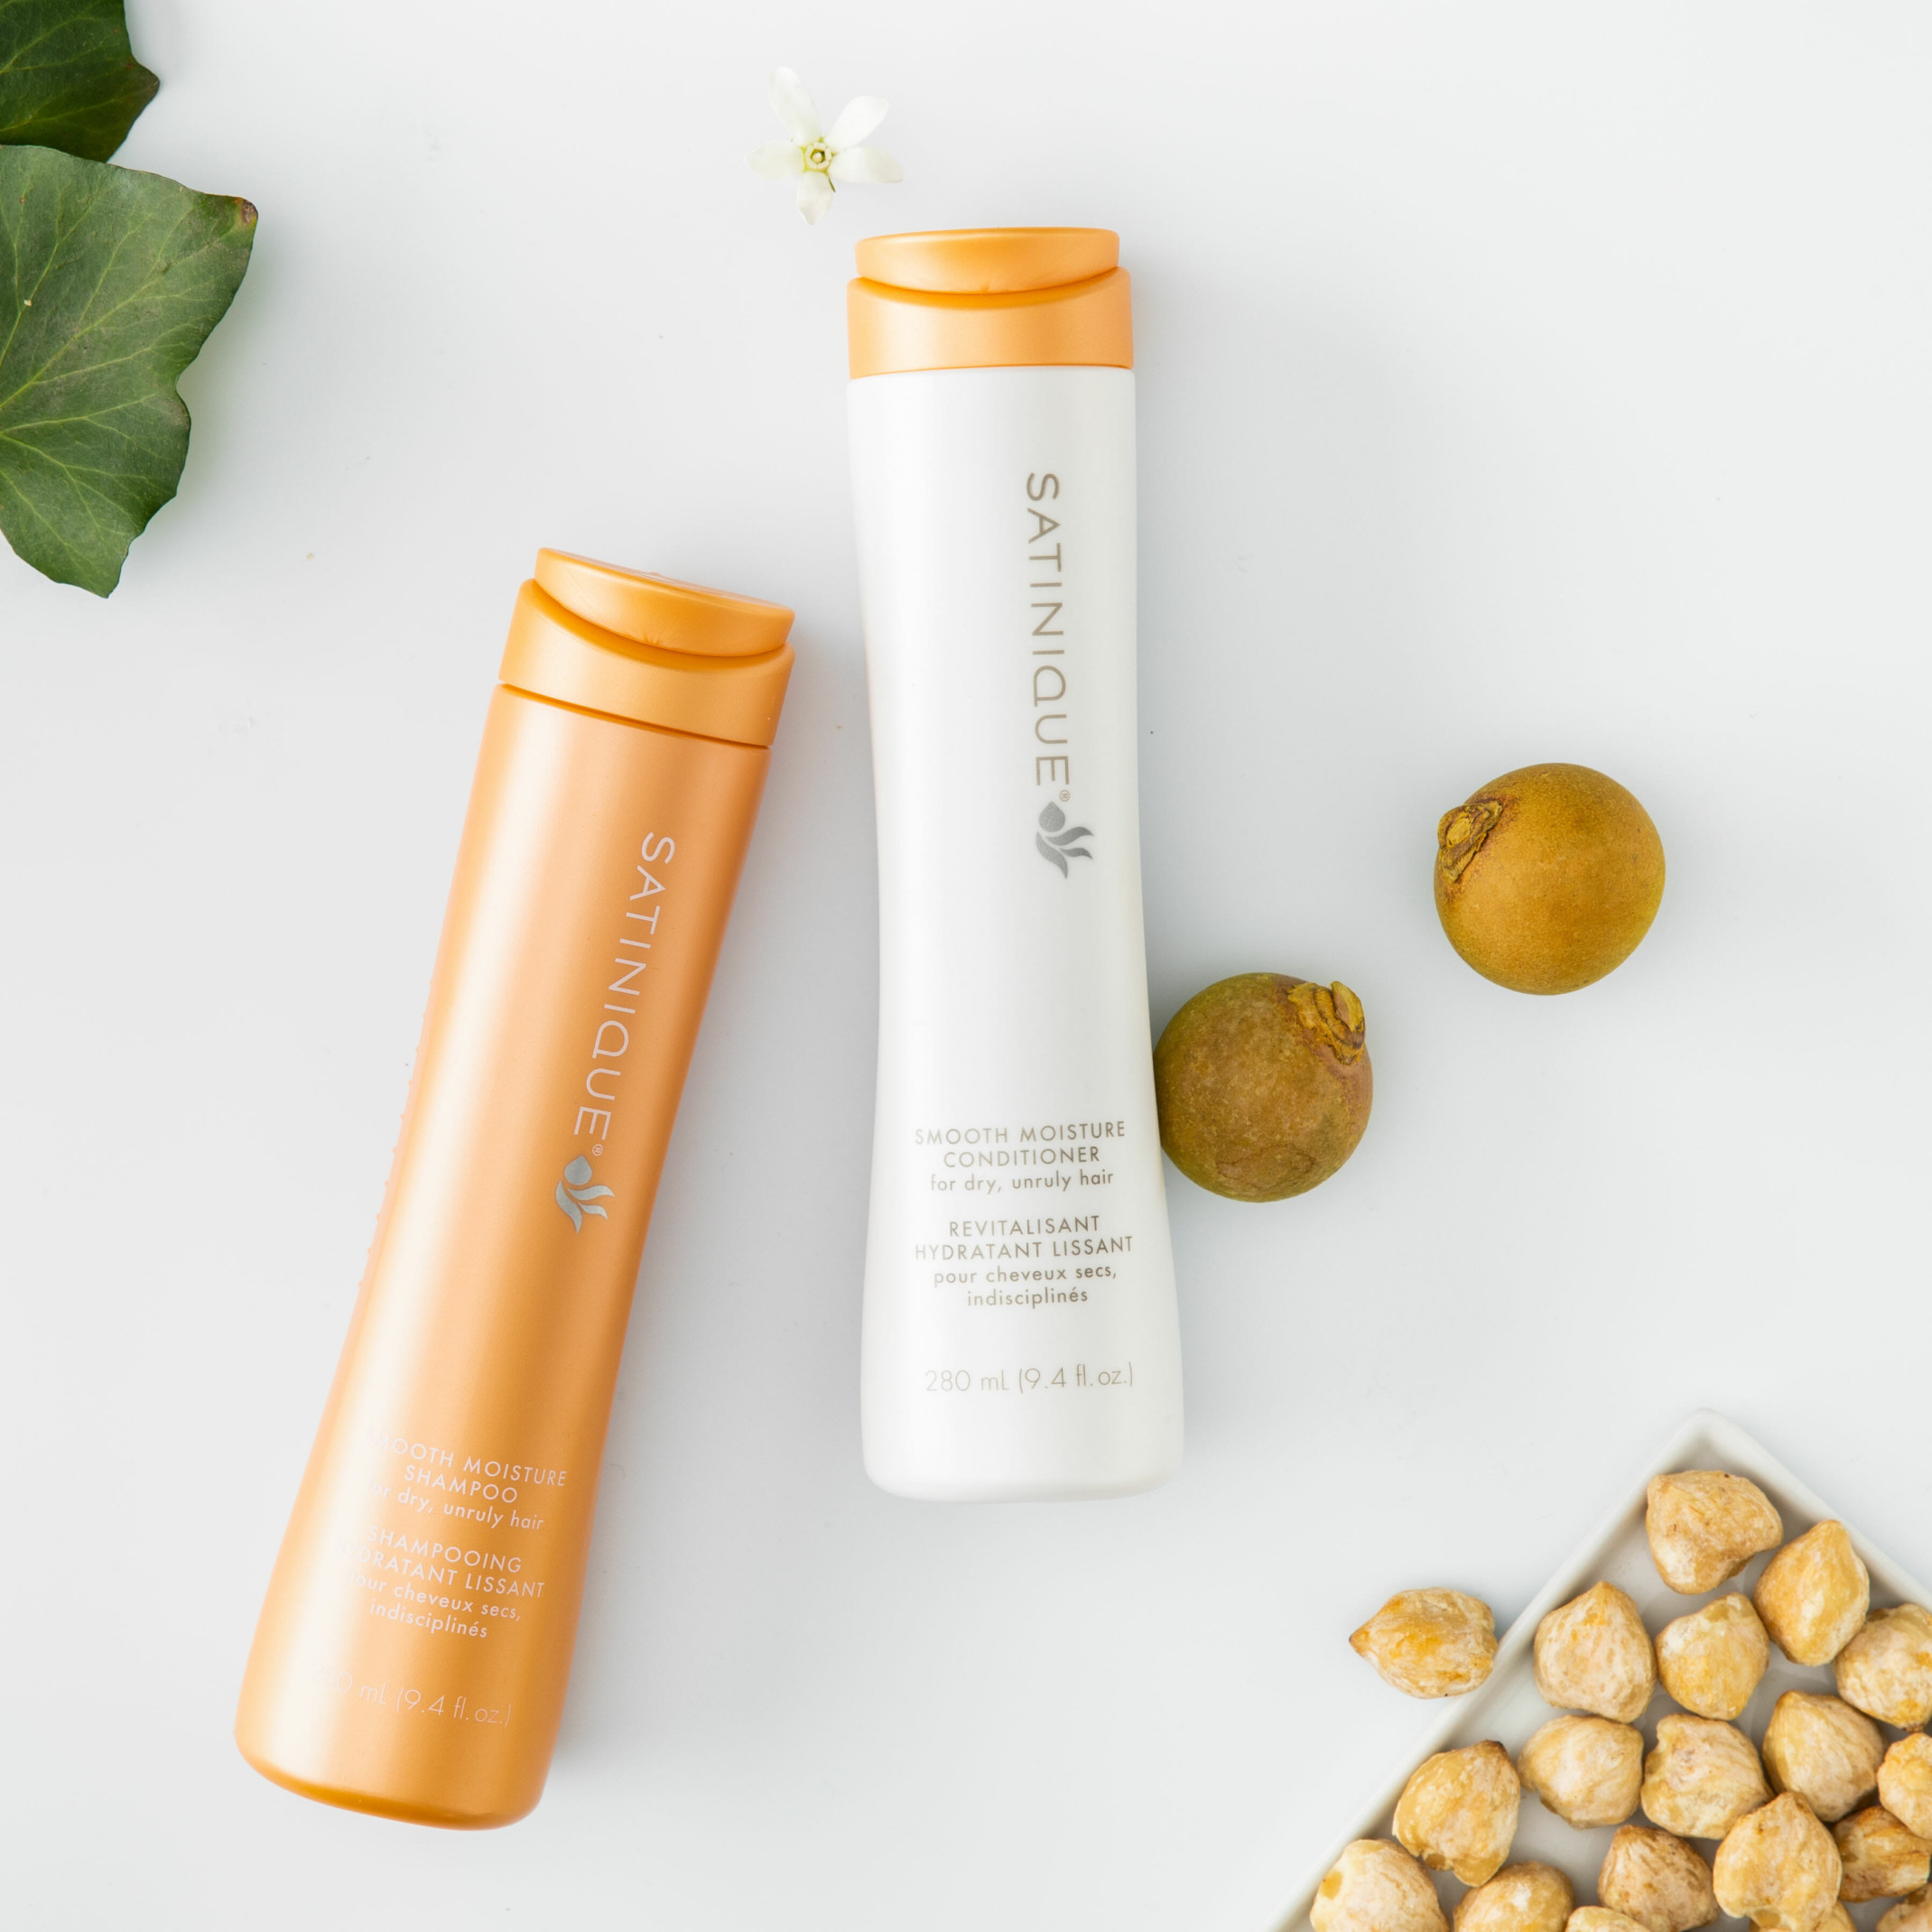 Orange Satinique Shampoo and Conditioner Bottles with ingredients